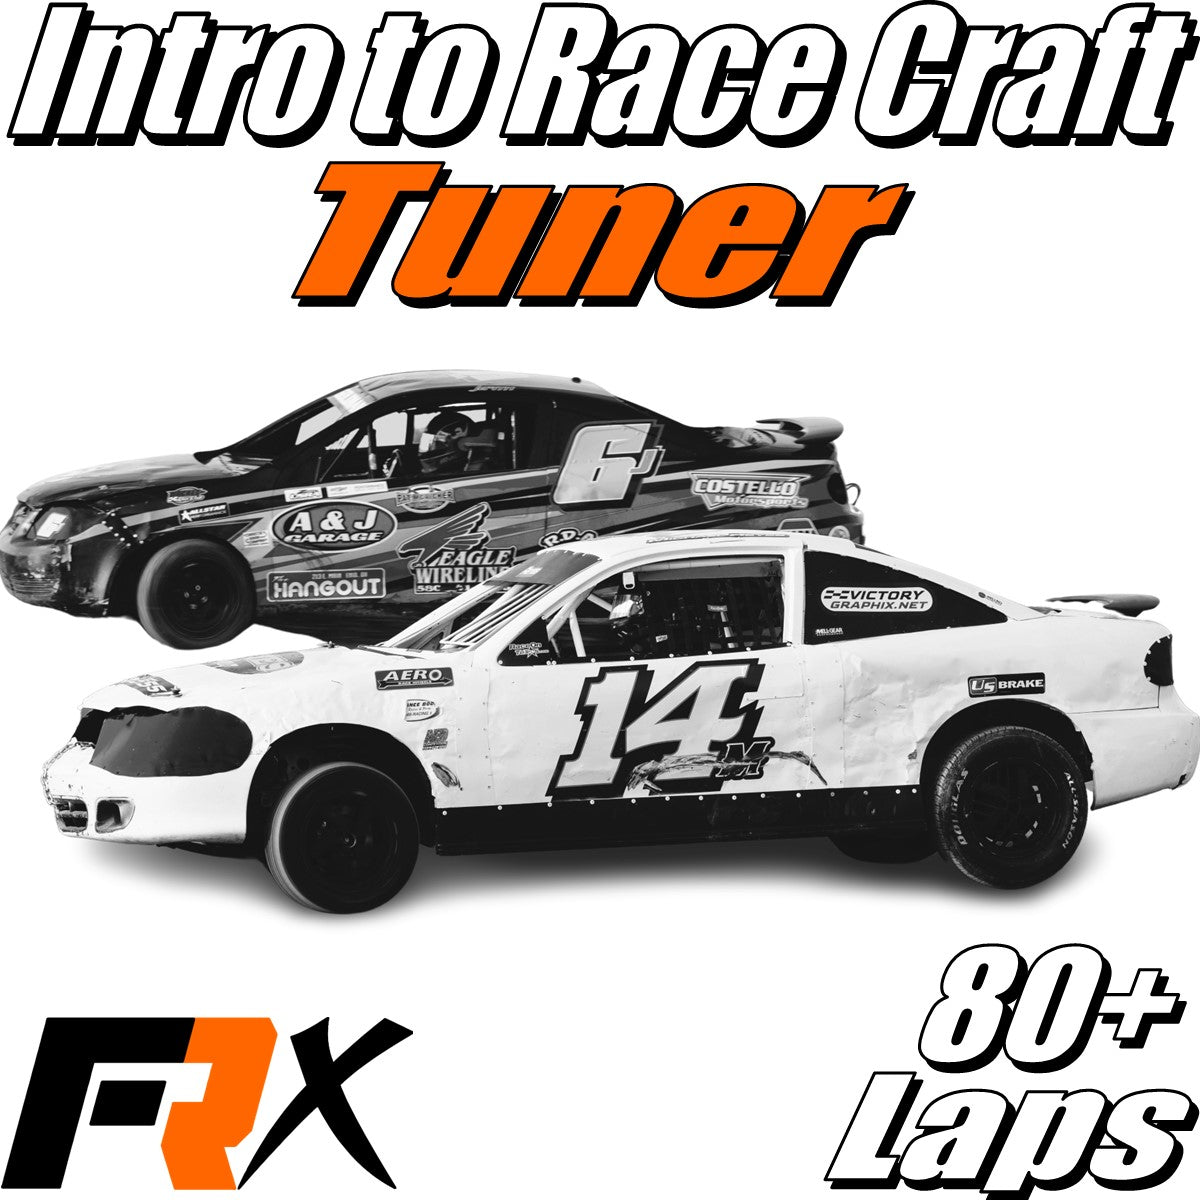 Fauver Racing Xperience Gift Certificate